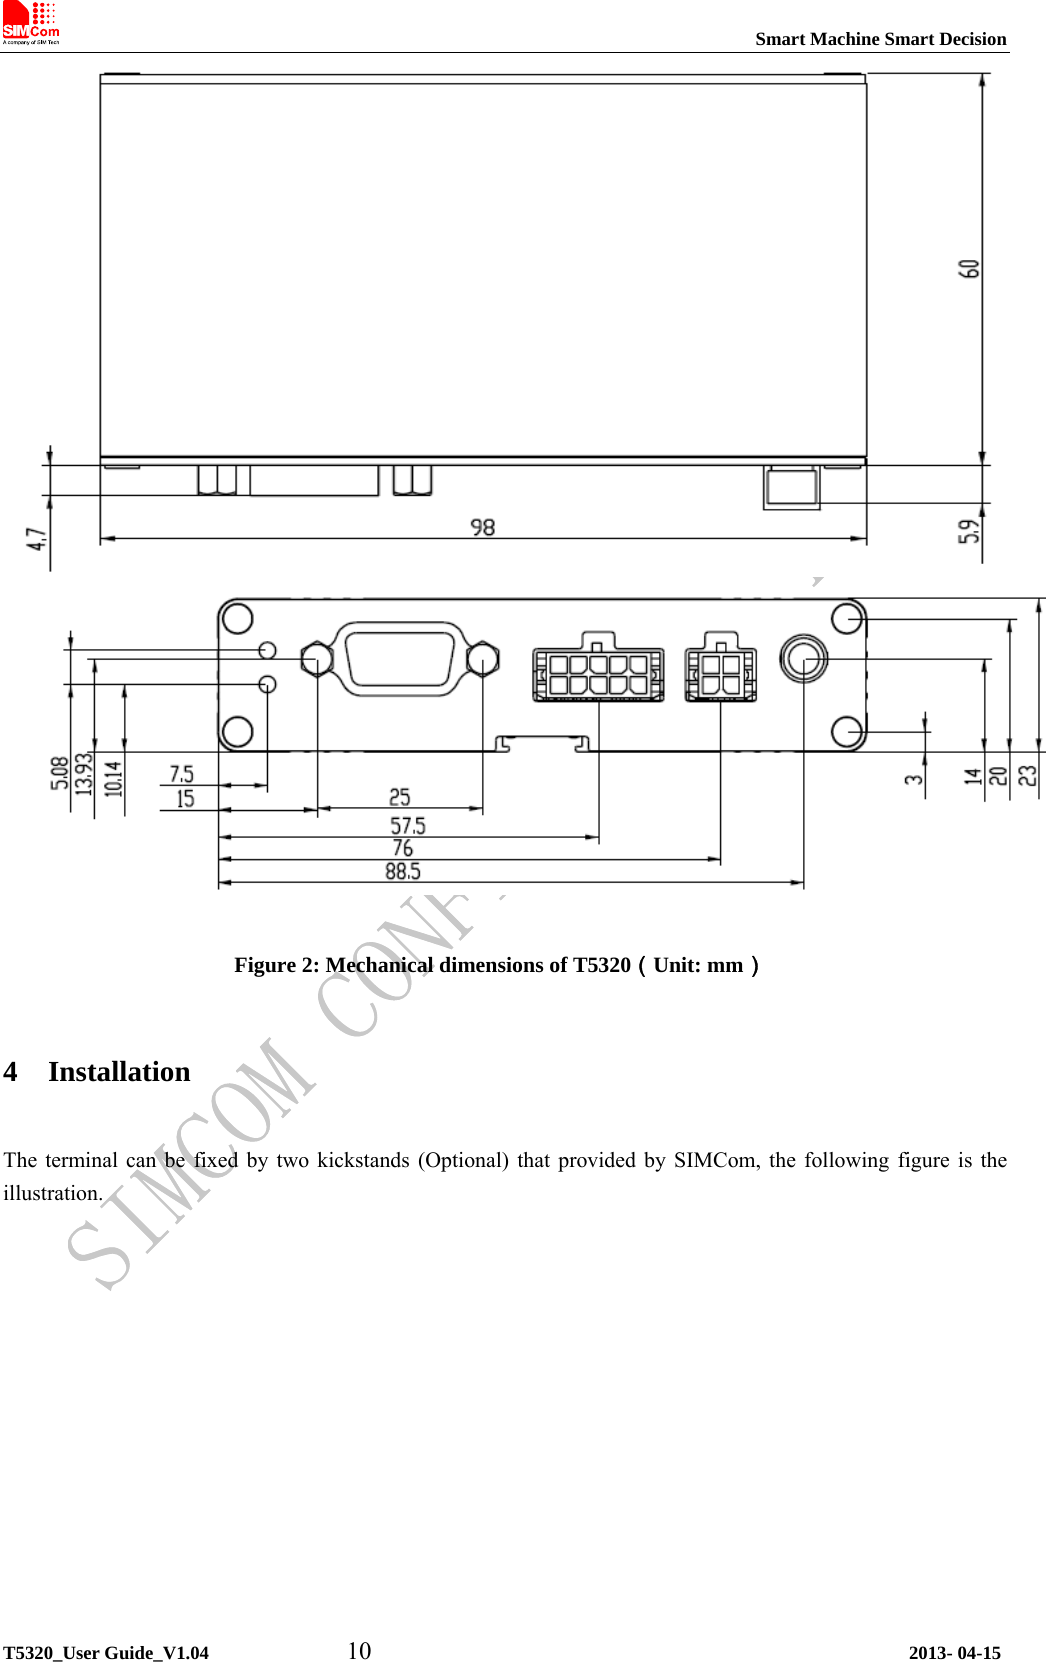                                                                           Smart Machine Smart Decision             T5320_User Guide_V1.04           10                                           2013- 04-15   Figure 2: Mechanical dimensions of T5320（Unit: mm） 4 Installation  The terminal can be fixed by two kickstands (Optional) that provided by SIMCom, the following figure is the illustration. 